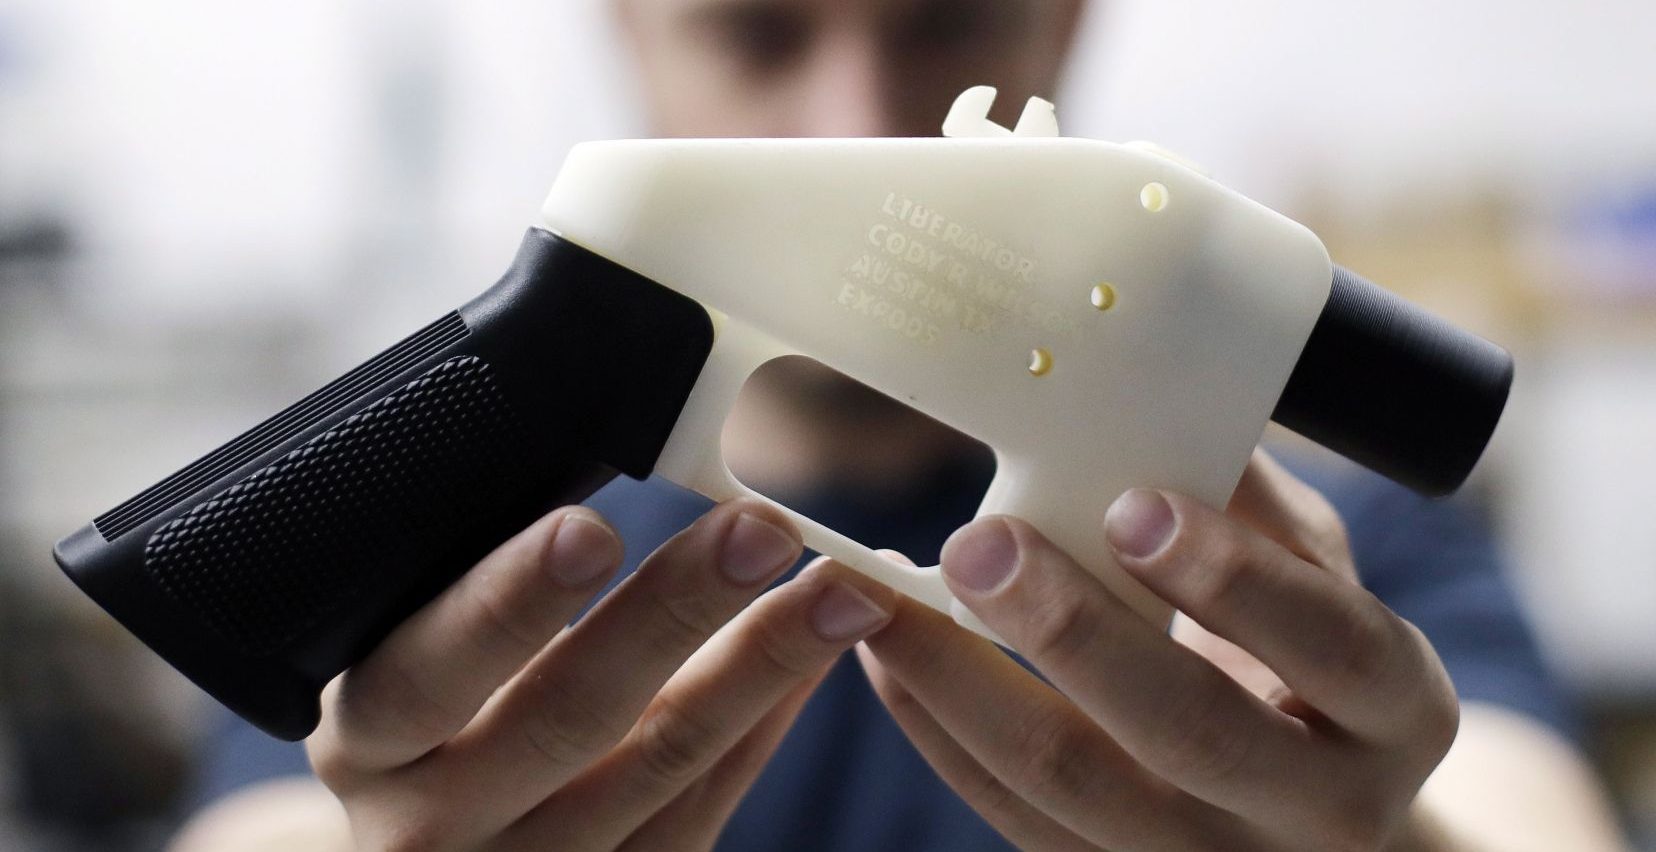 tempo præcedens fintælling 3D printed guns - what kind of gun can be 3D printed and how it works